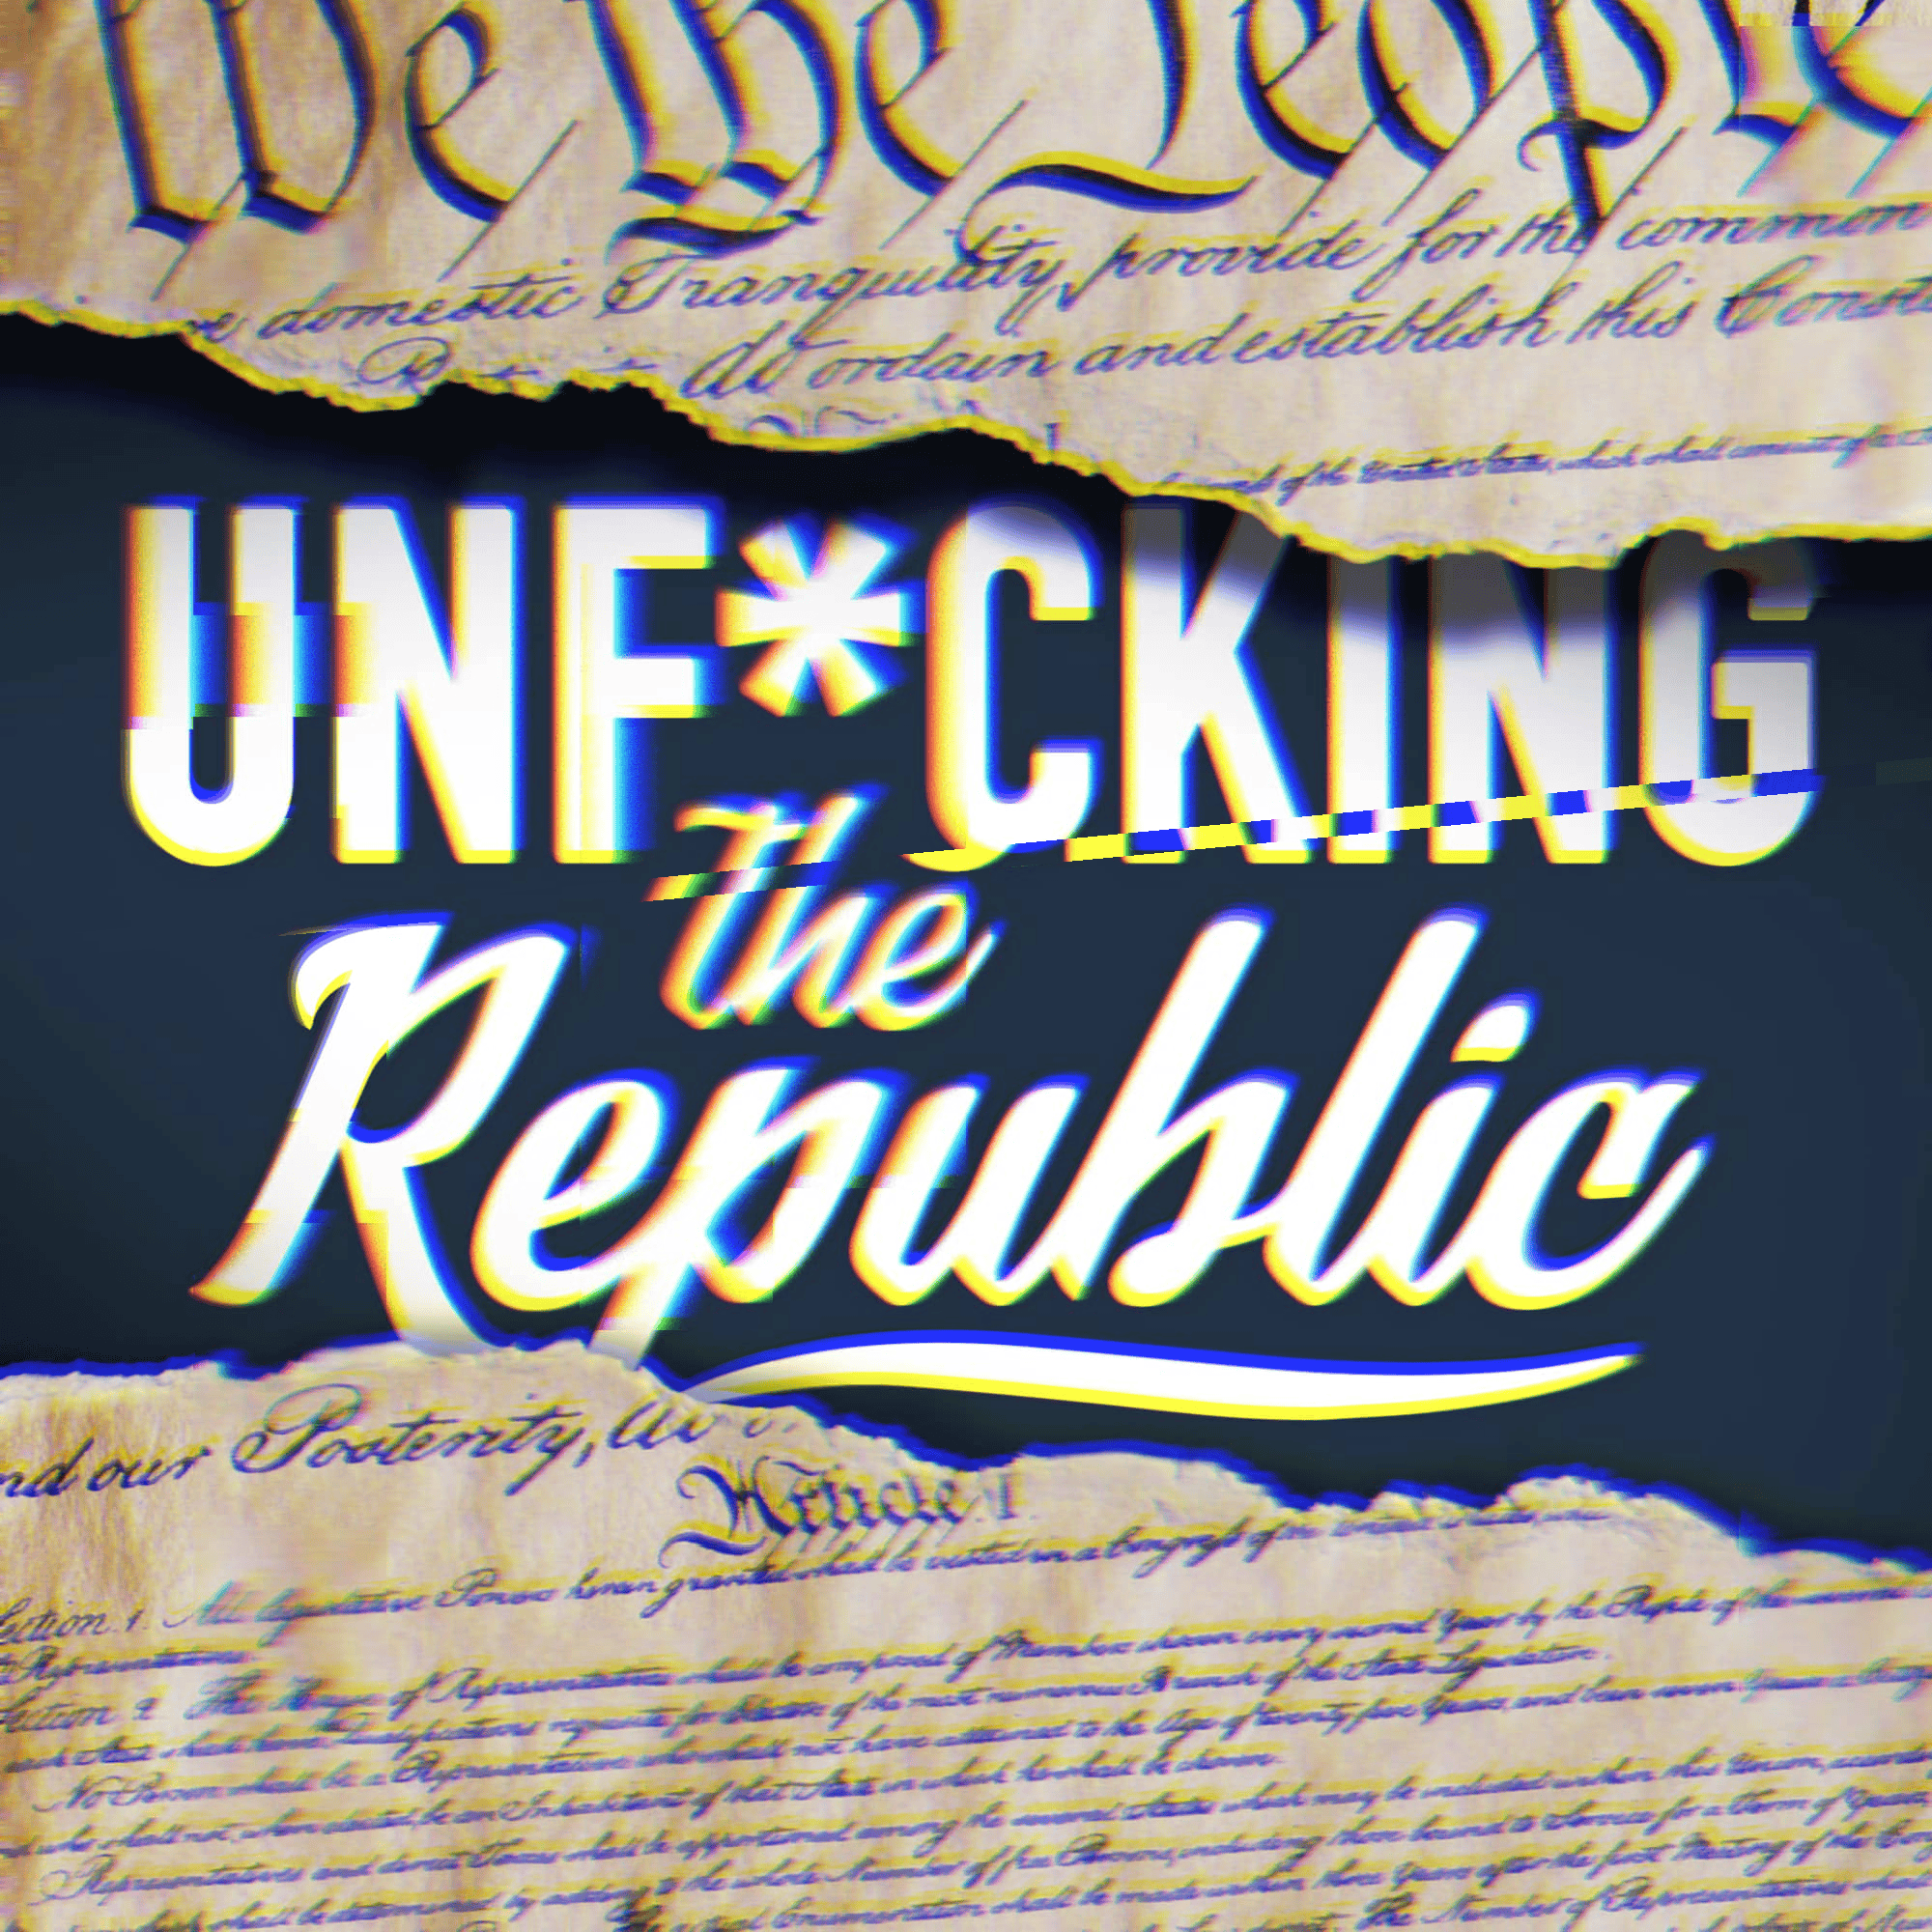 The US Constitution ripped in the middle revealing white text on a blue background that says, ‘Unf_cking the Republic.’ Letters have a glitchy rainbow effect on them